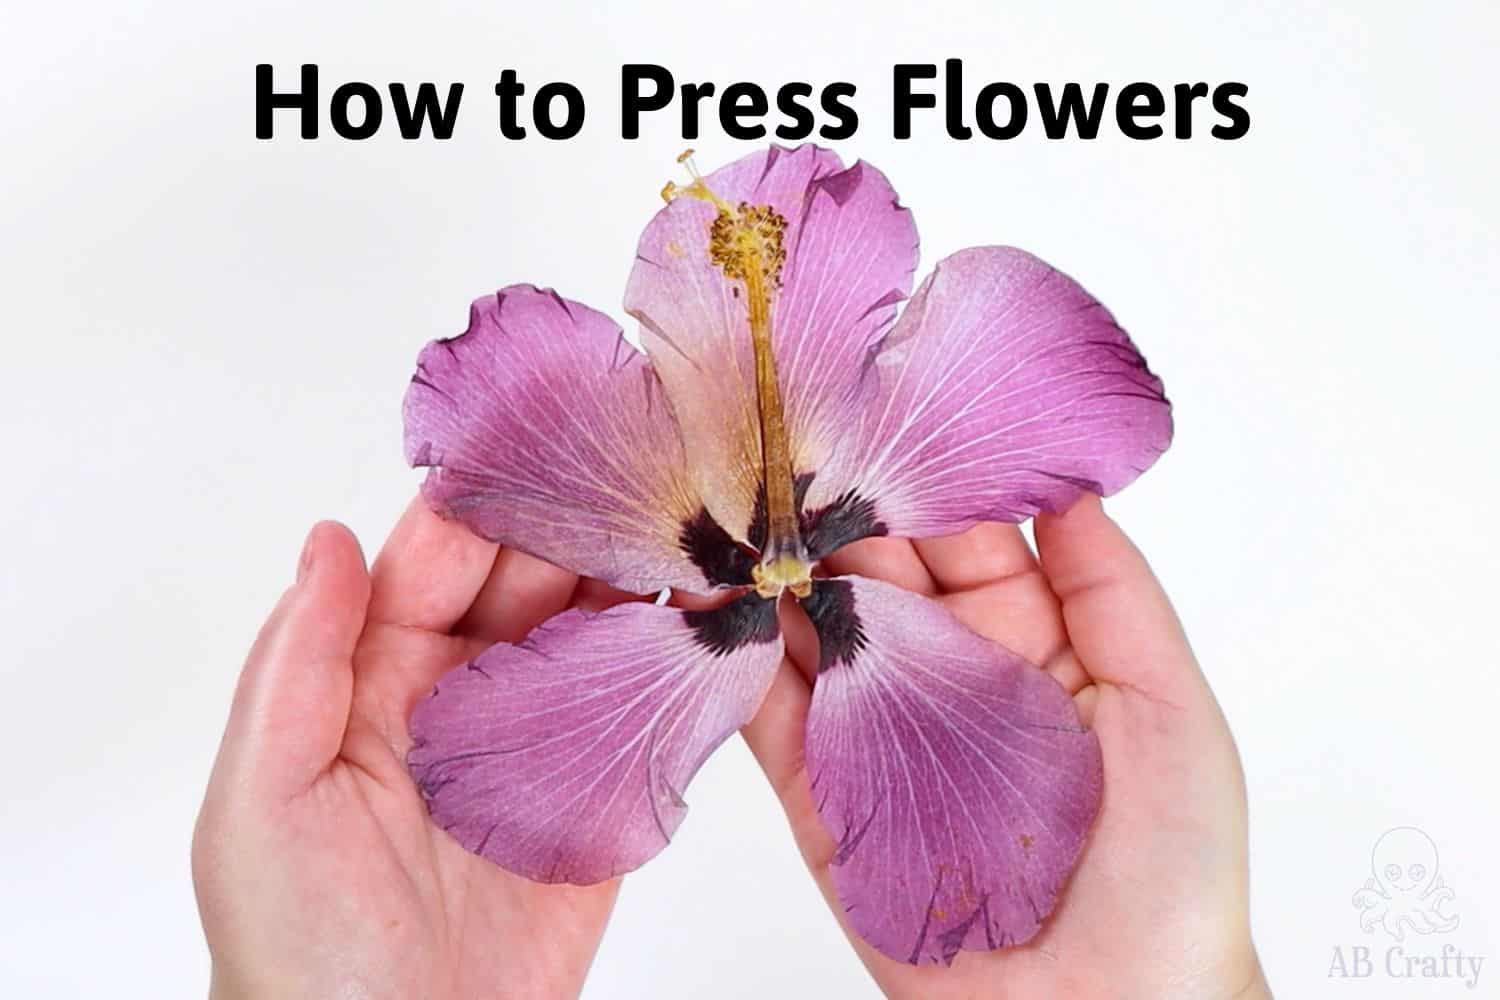 Flower Pressing: How To Press Your Own Flowers for Creative Projects